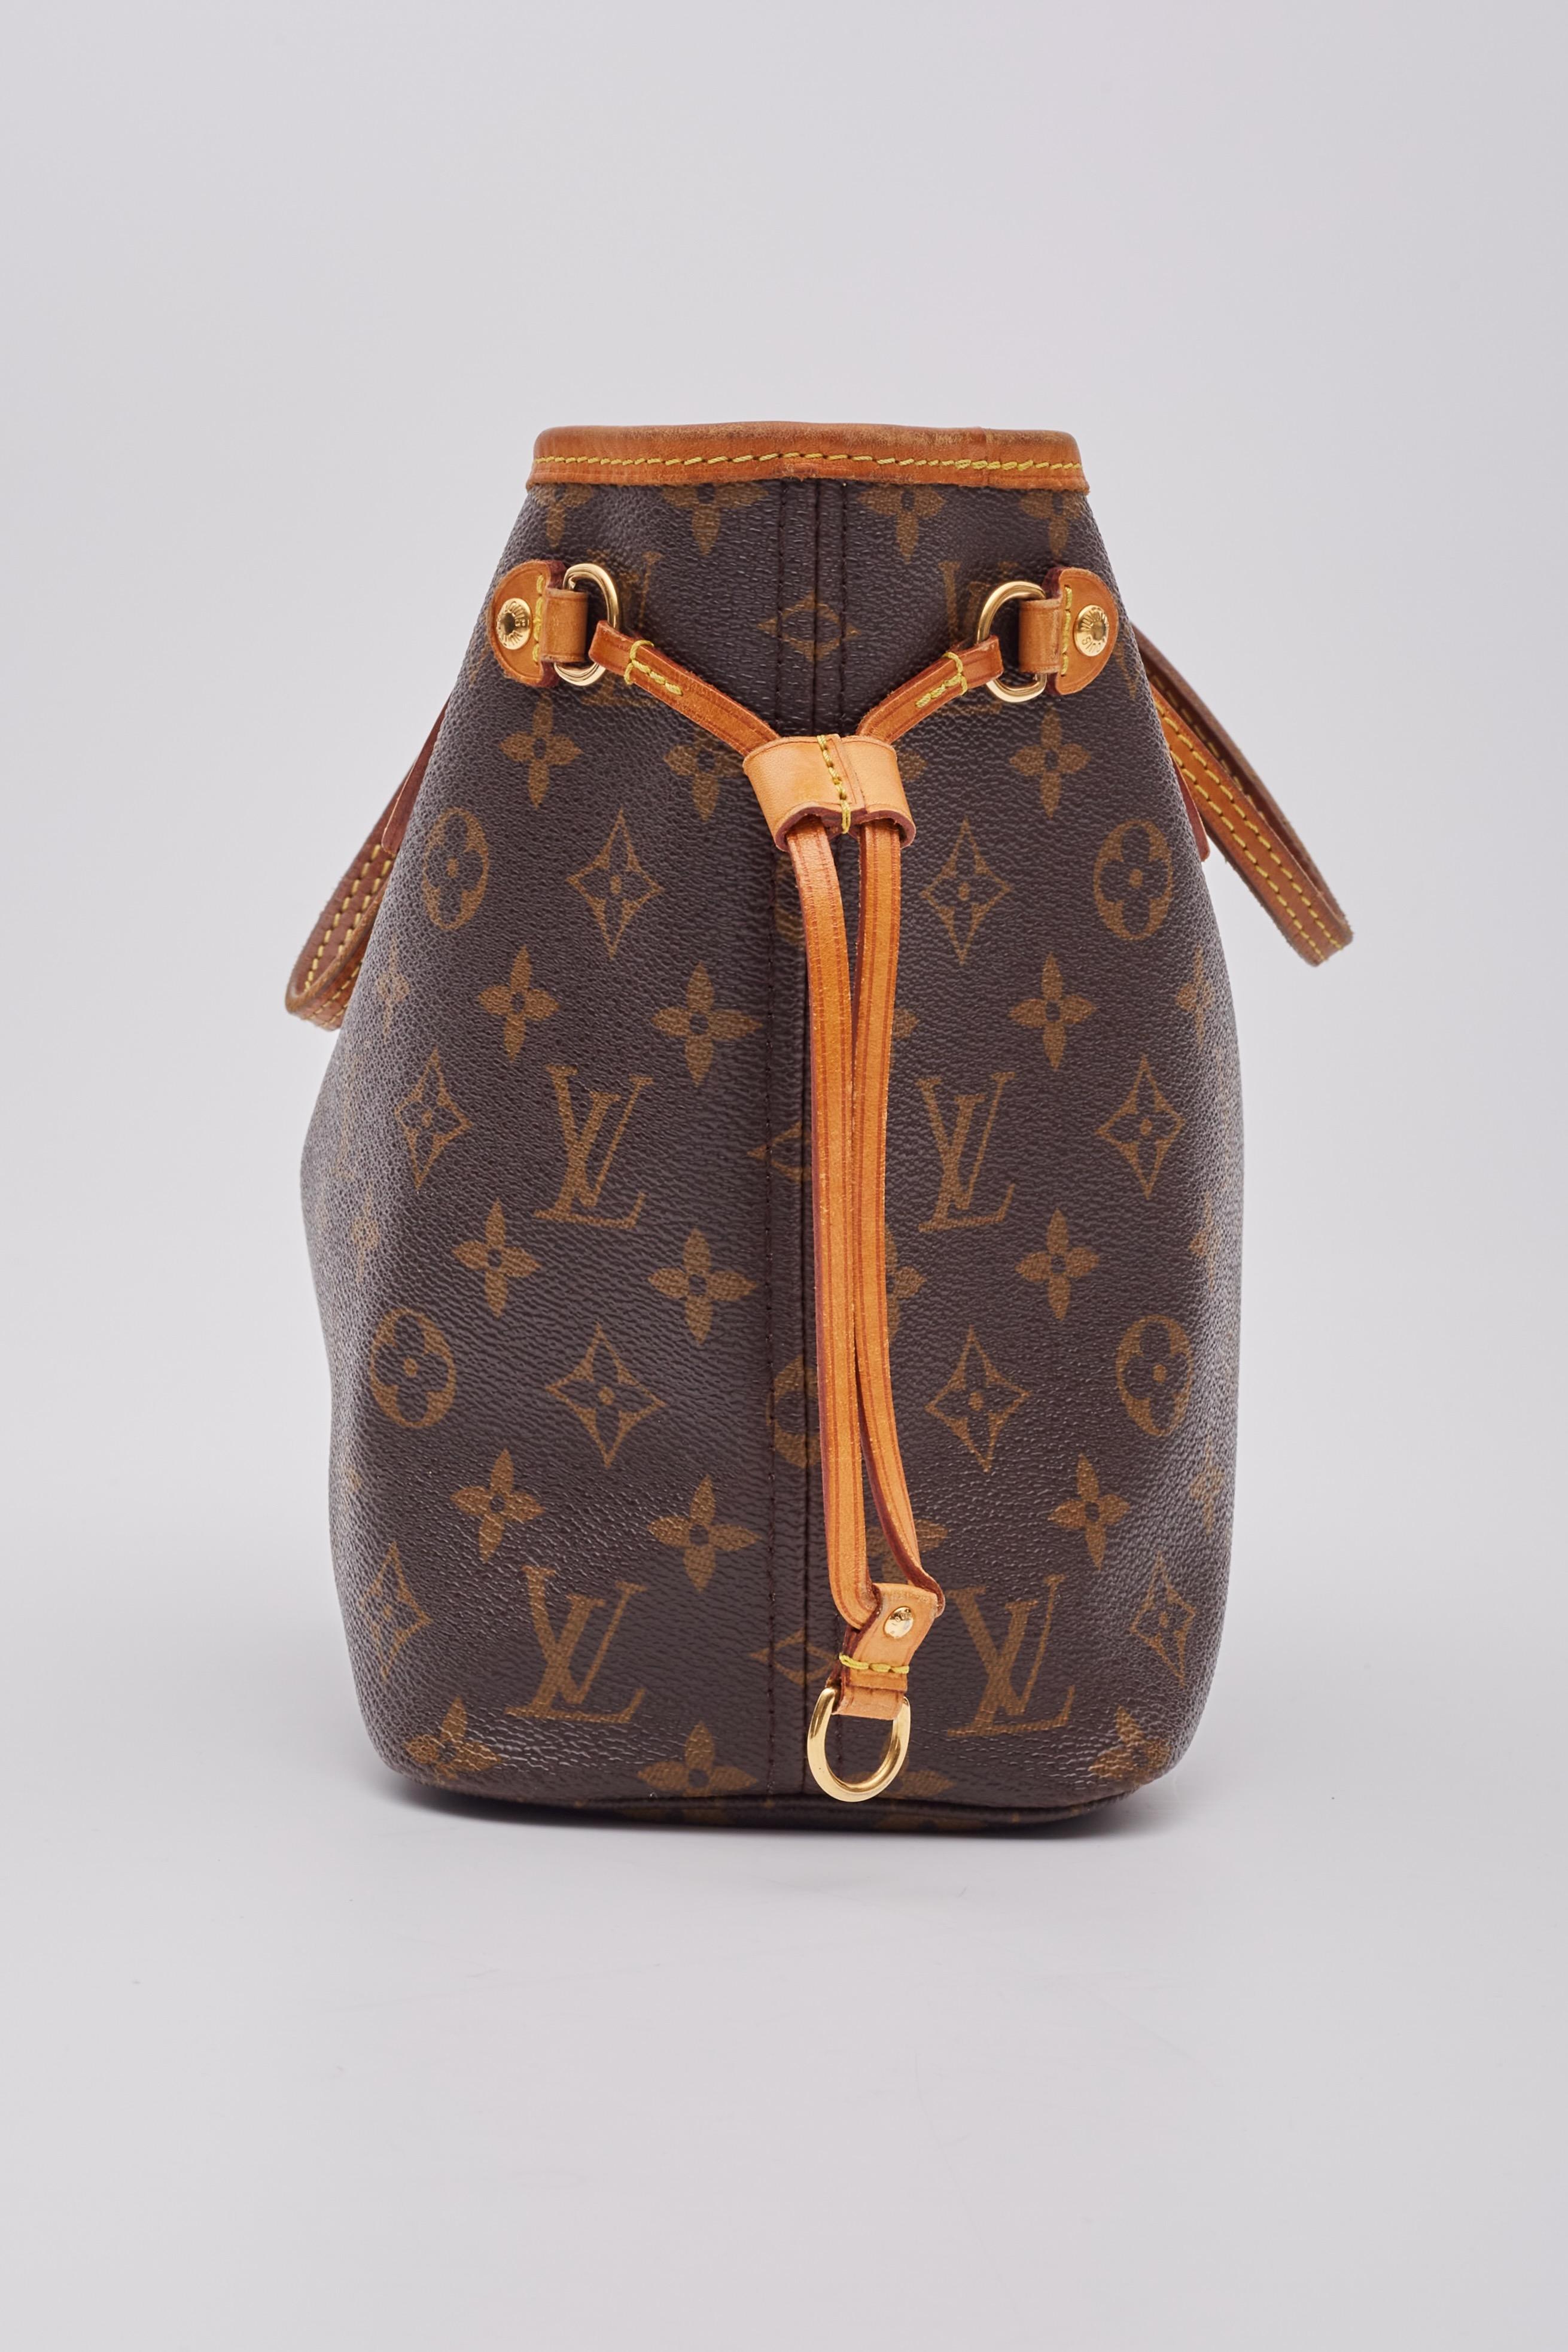 Louis Vuitton Monogram Neverfull Tote Pm Discontinued For Sale 2